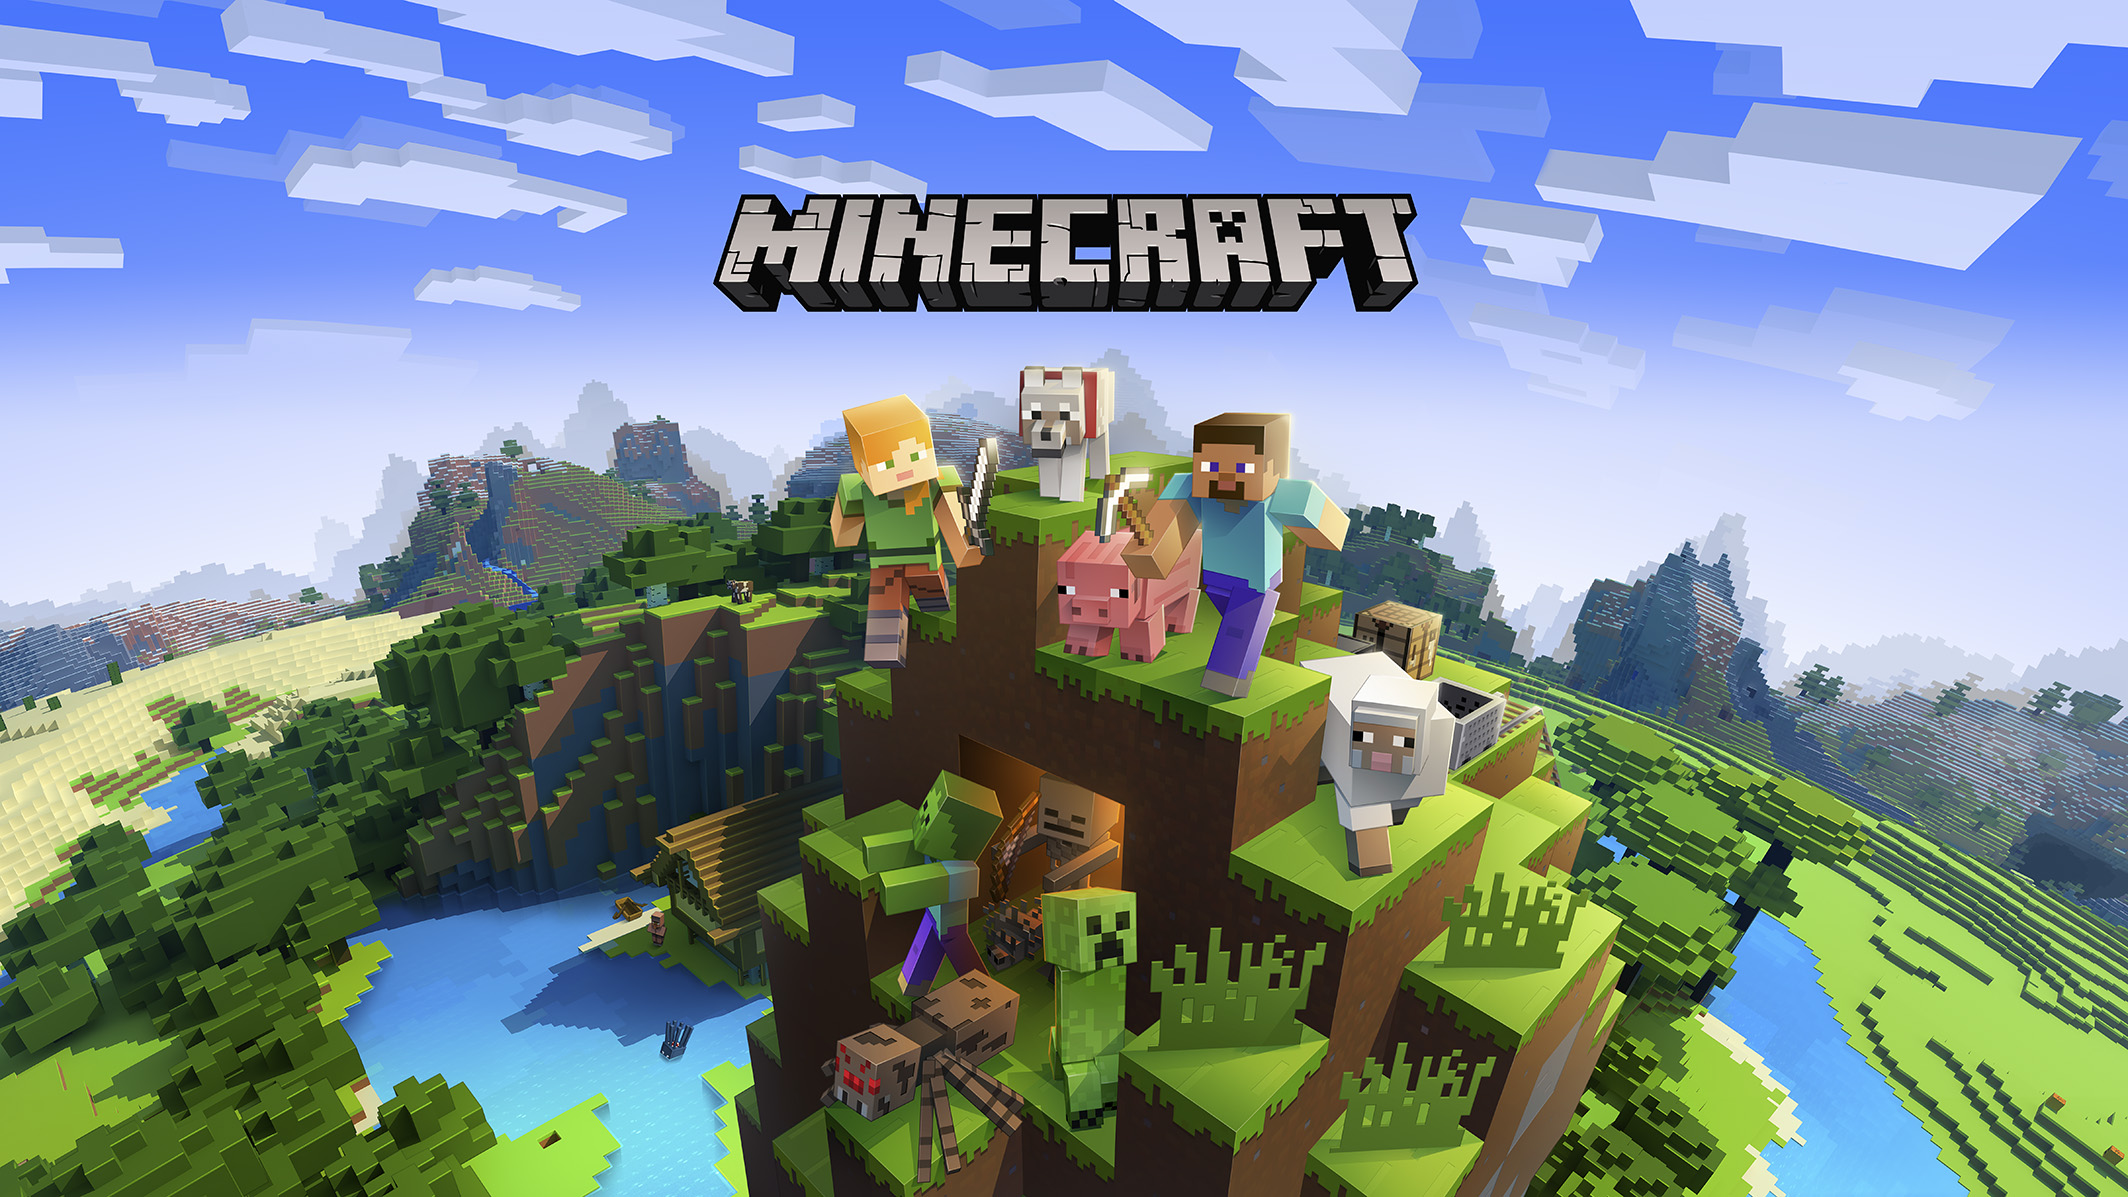 Minecraft characters on top of a mountain in the game